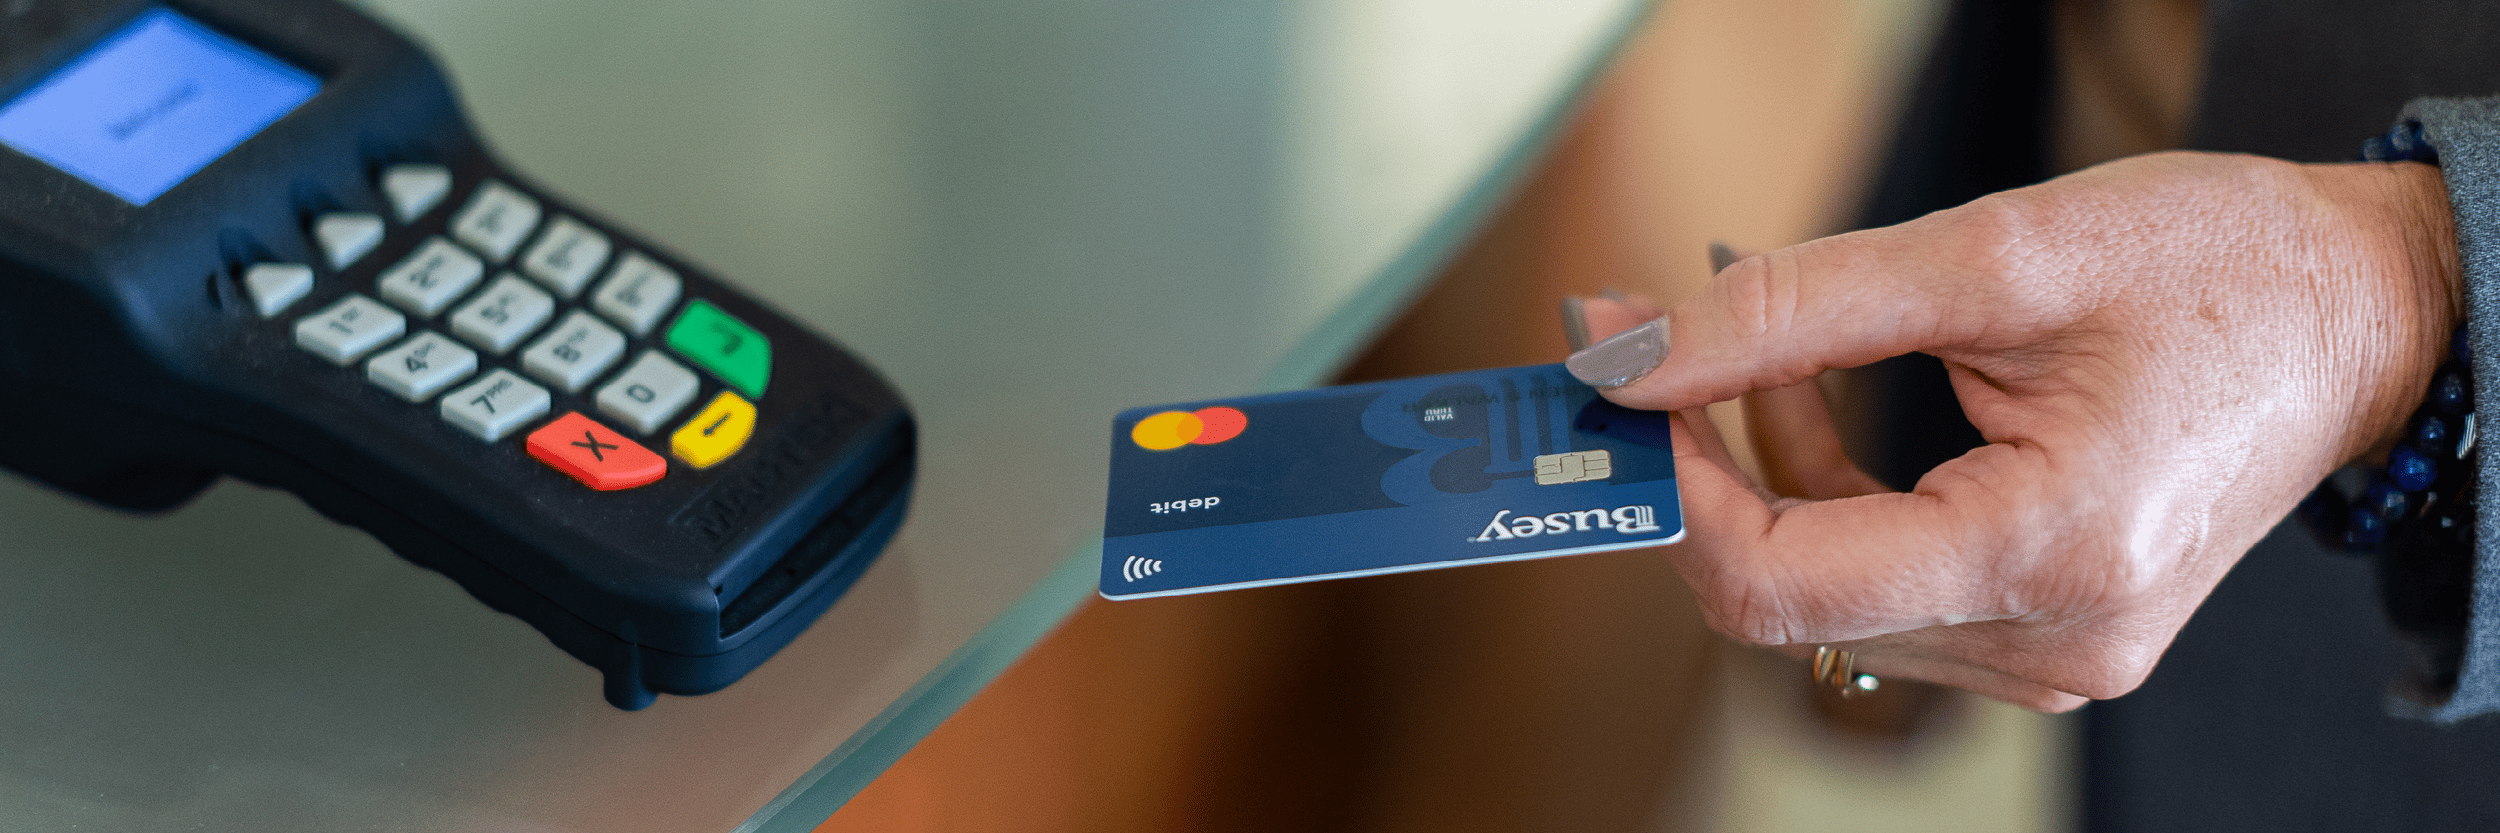 A person holding a credit card is ready to insert into a scanner